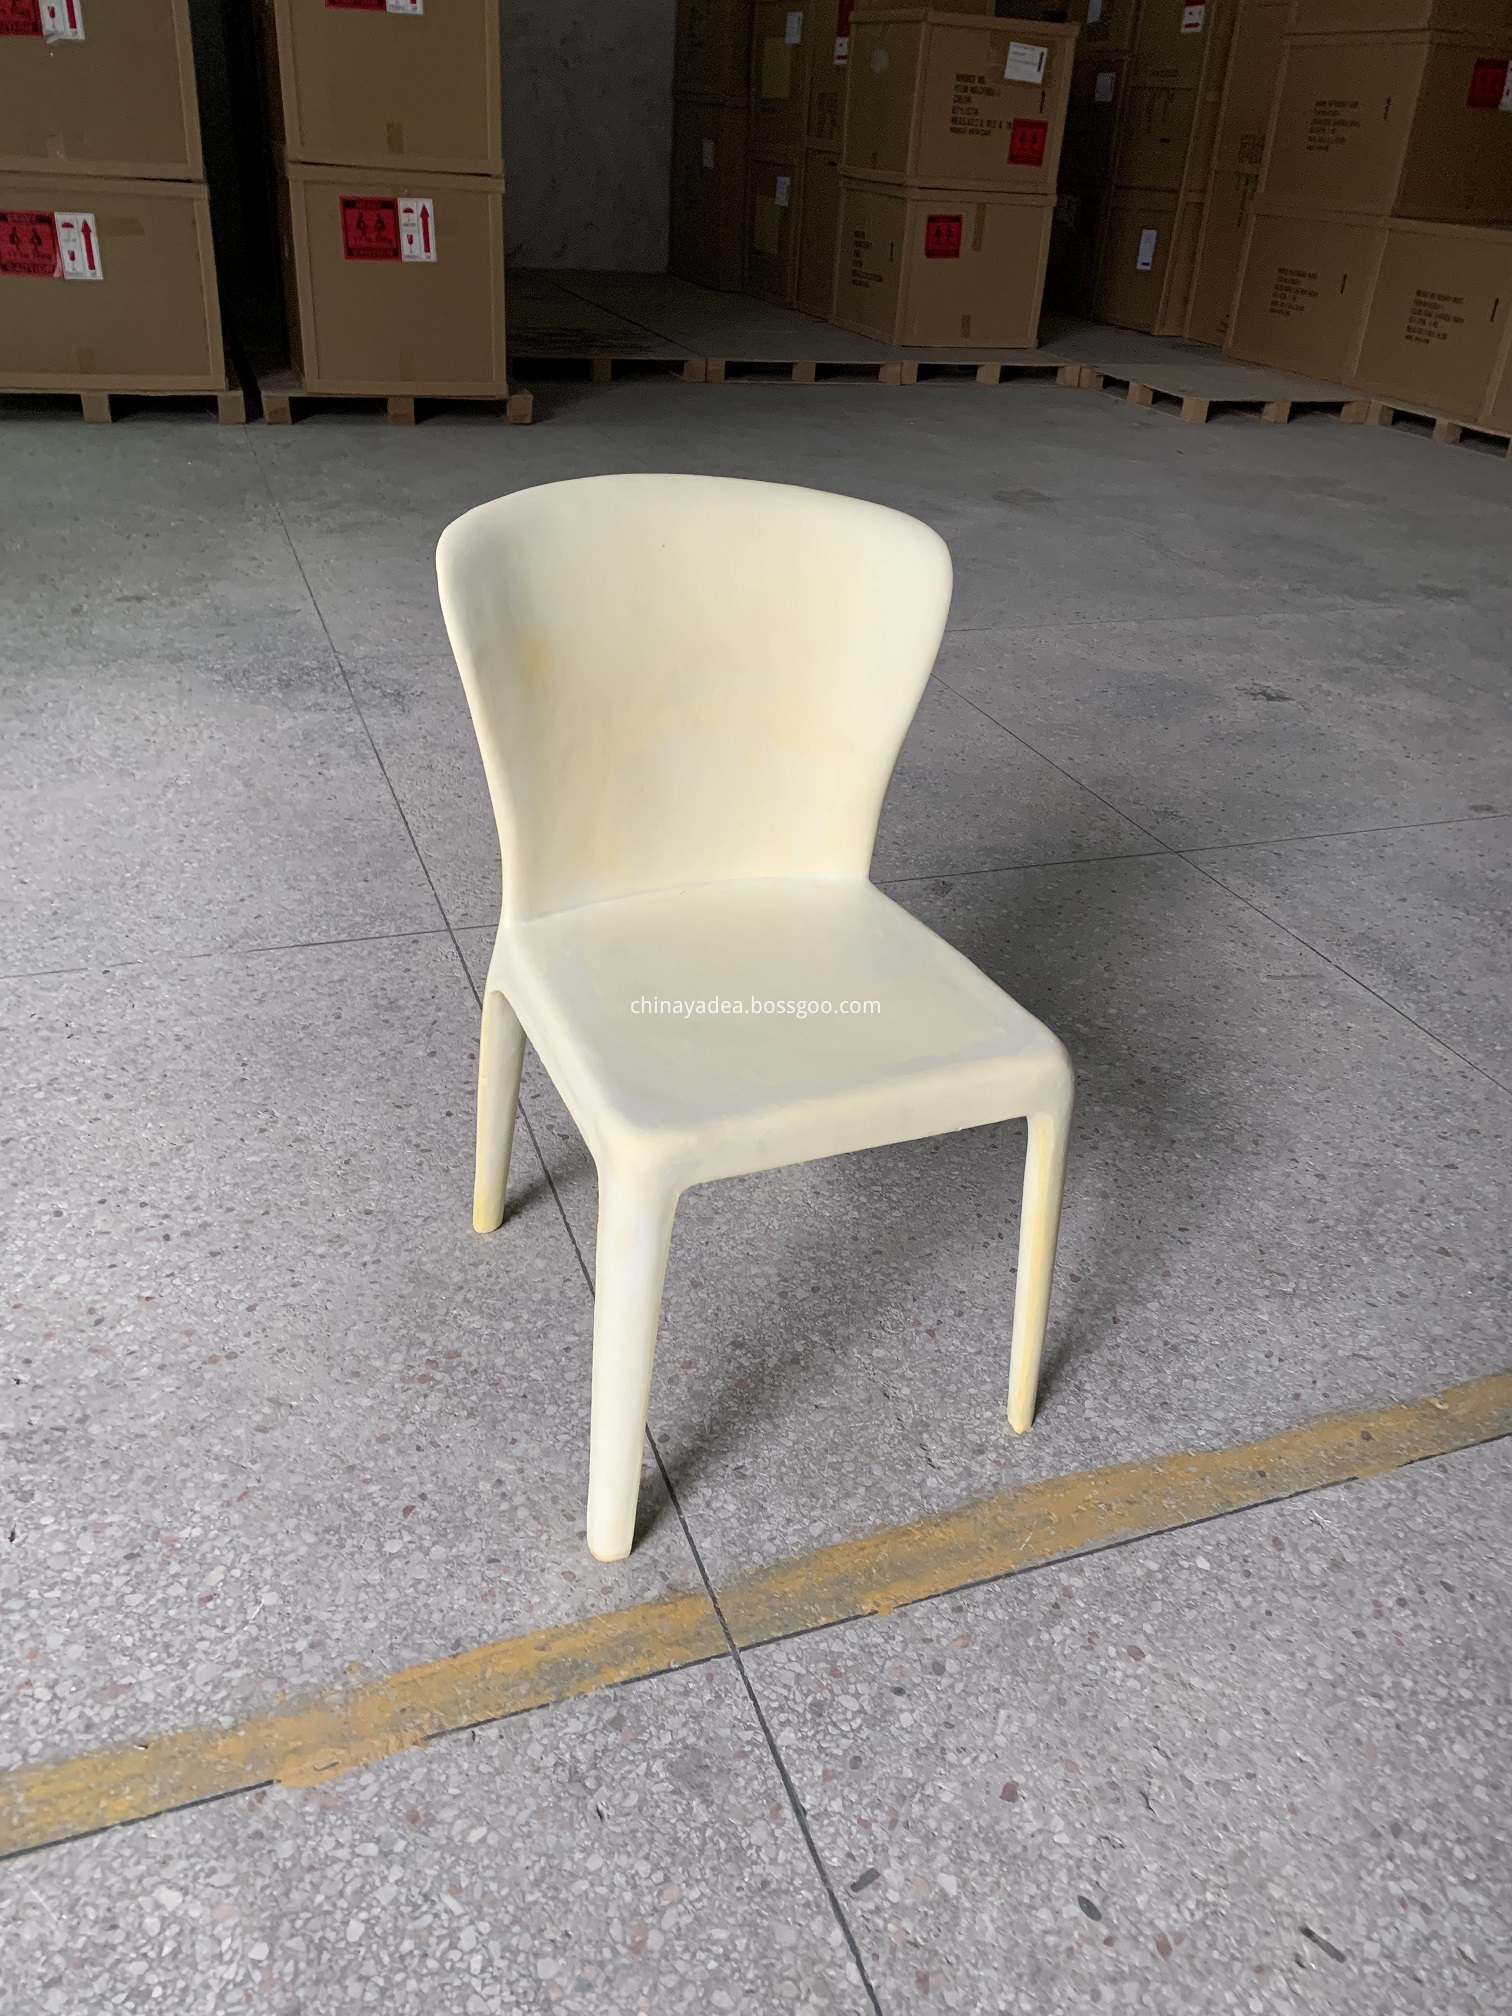 Pu injection foam of hola chair